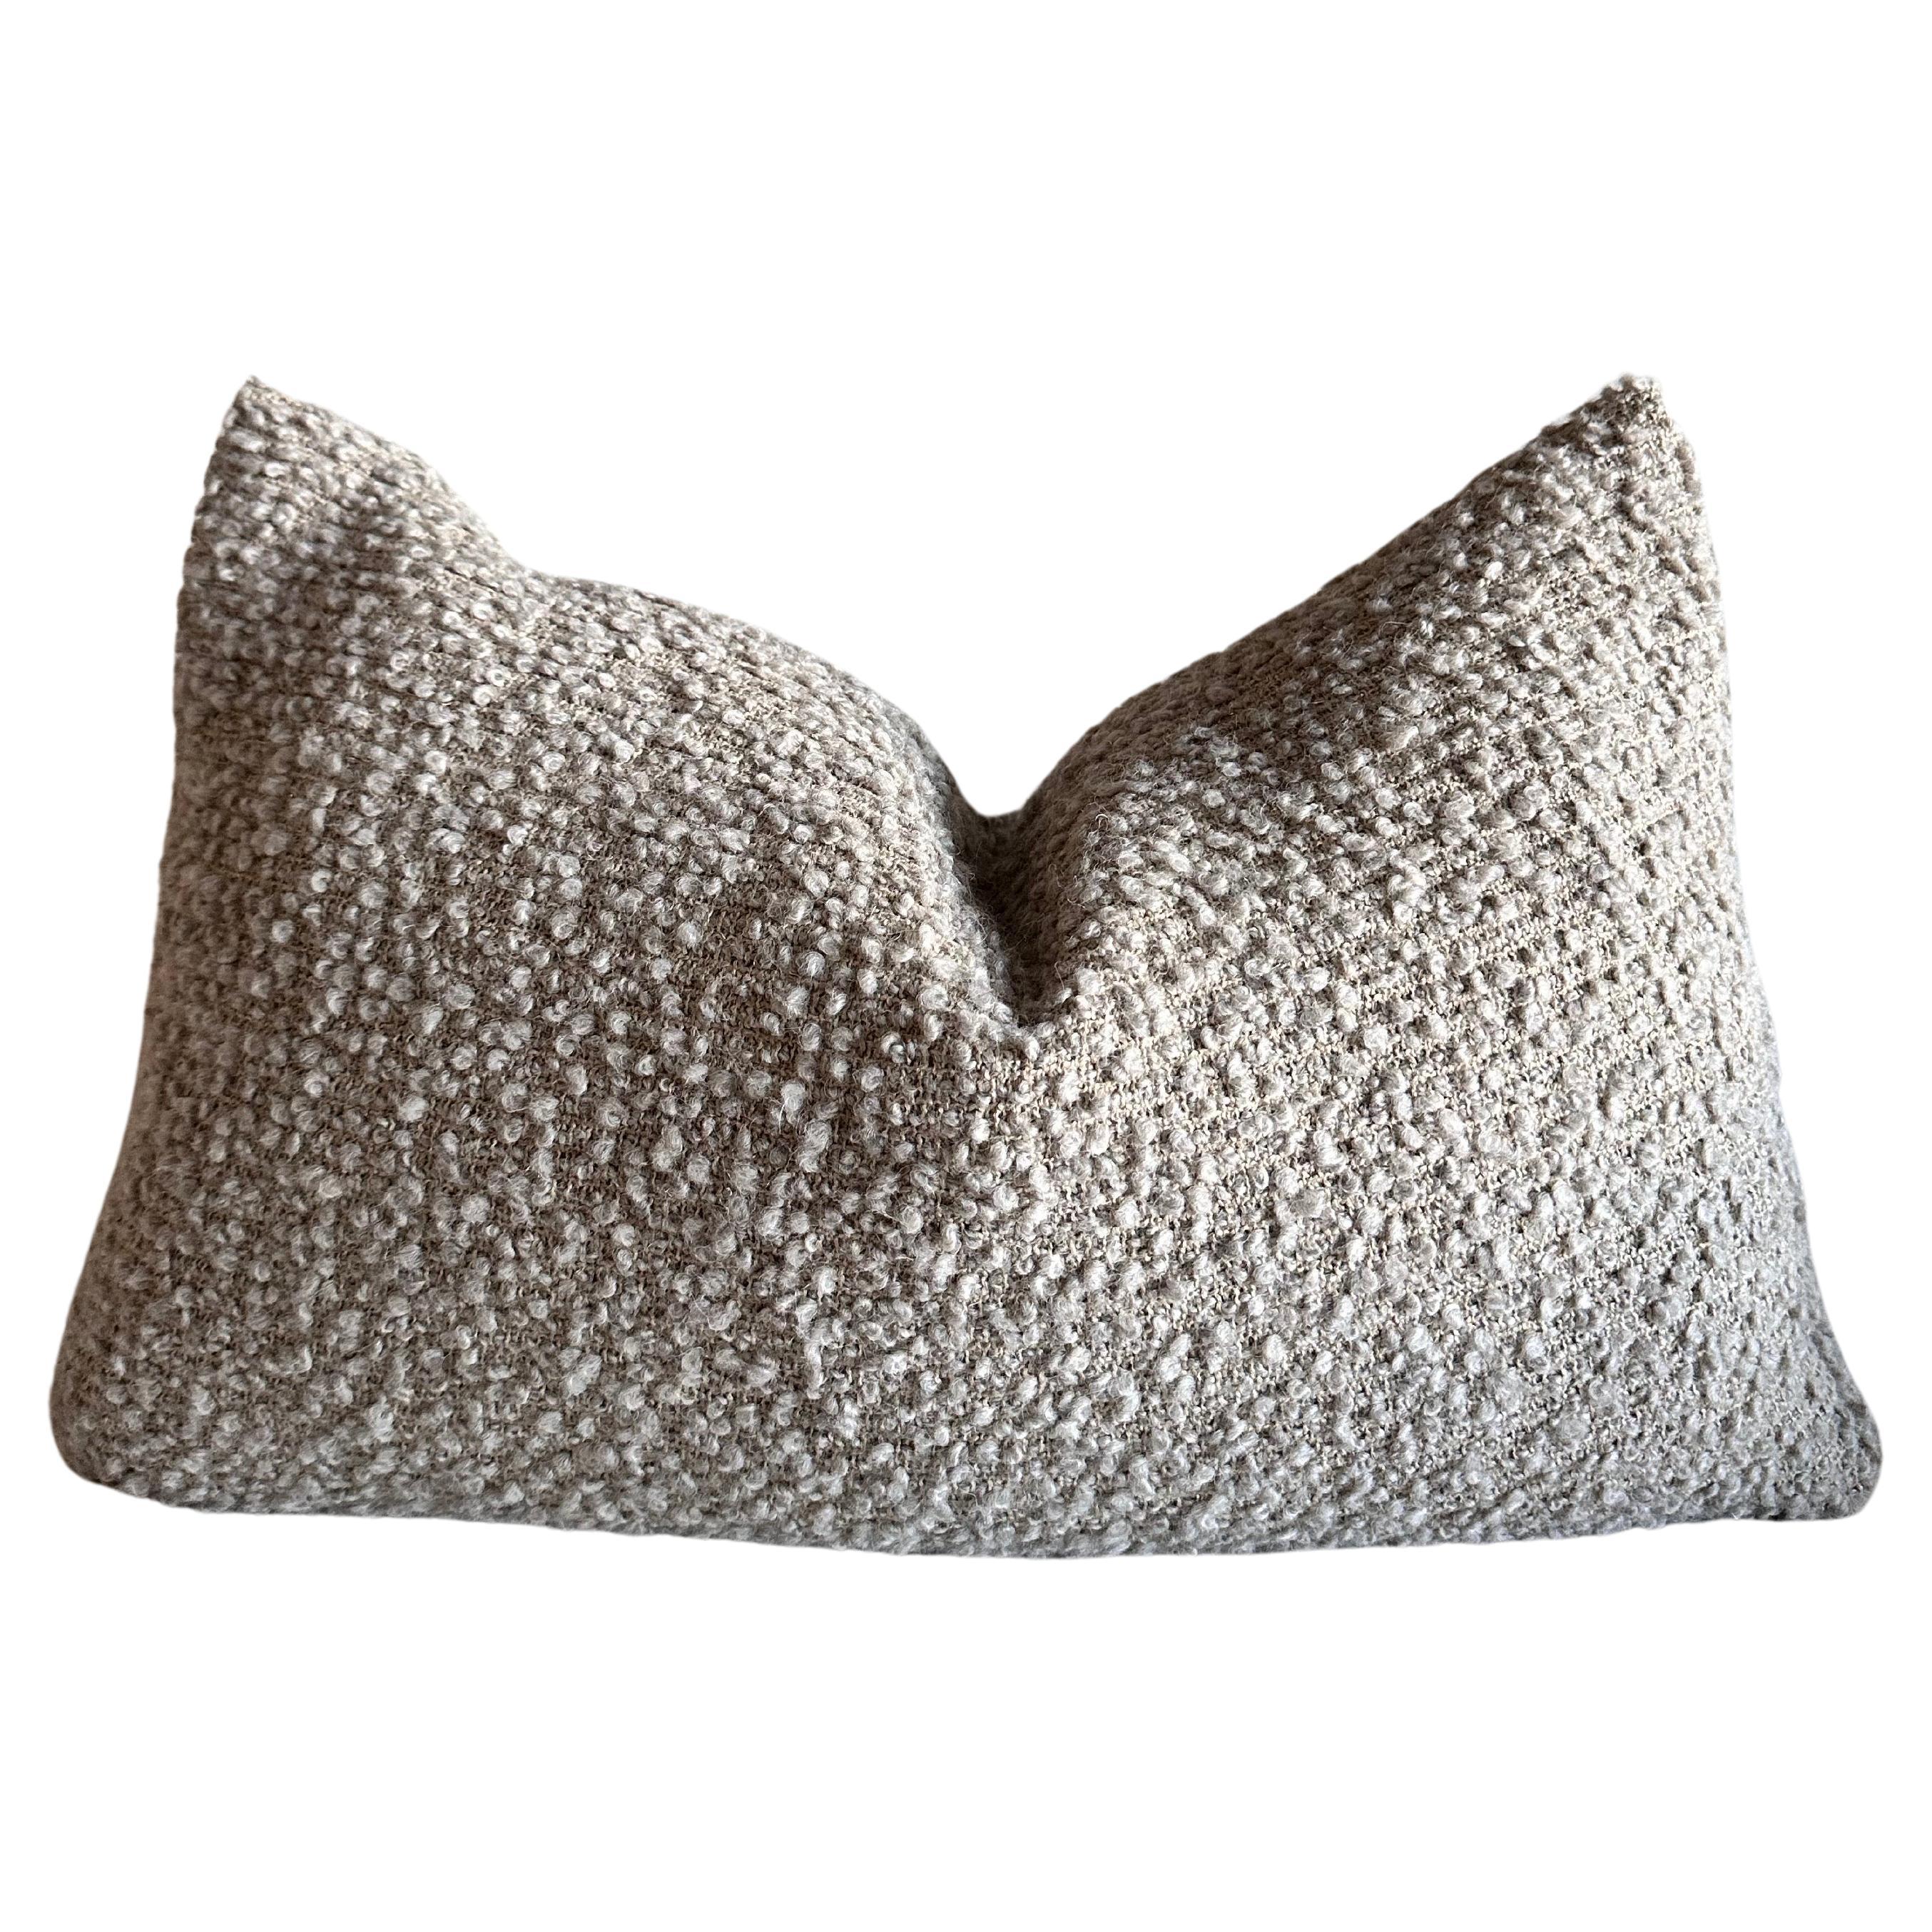 Woven Belgium Wool and Linen Lumbar Pillow in Could Gray Boucle Fabric